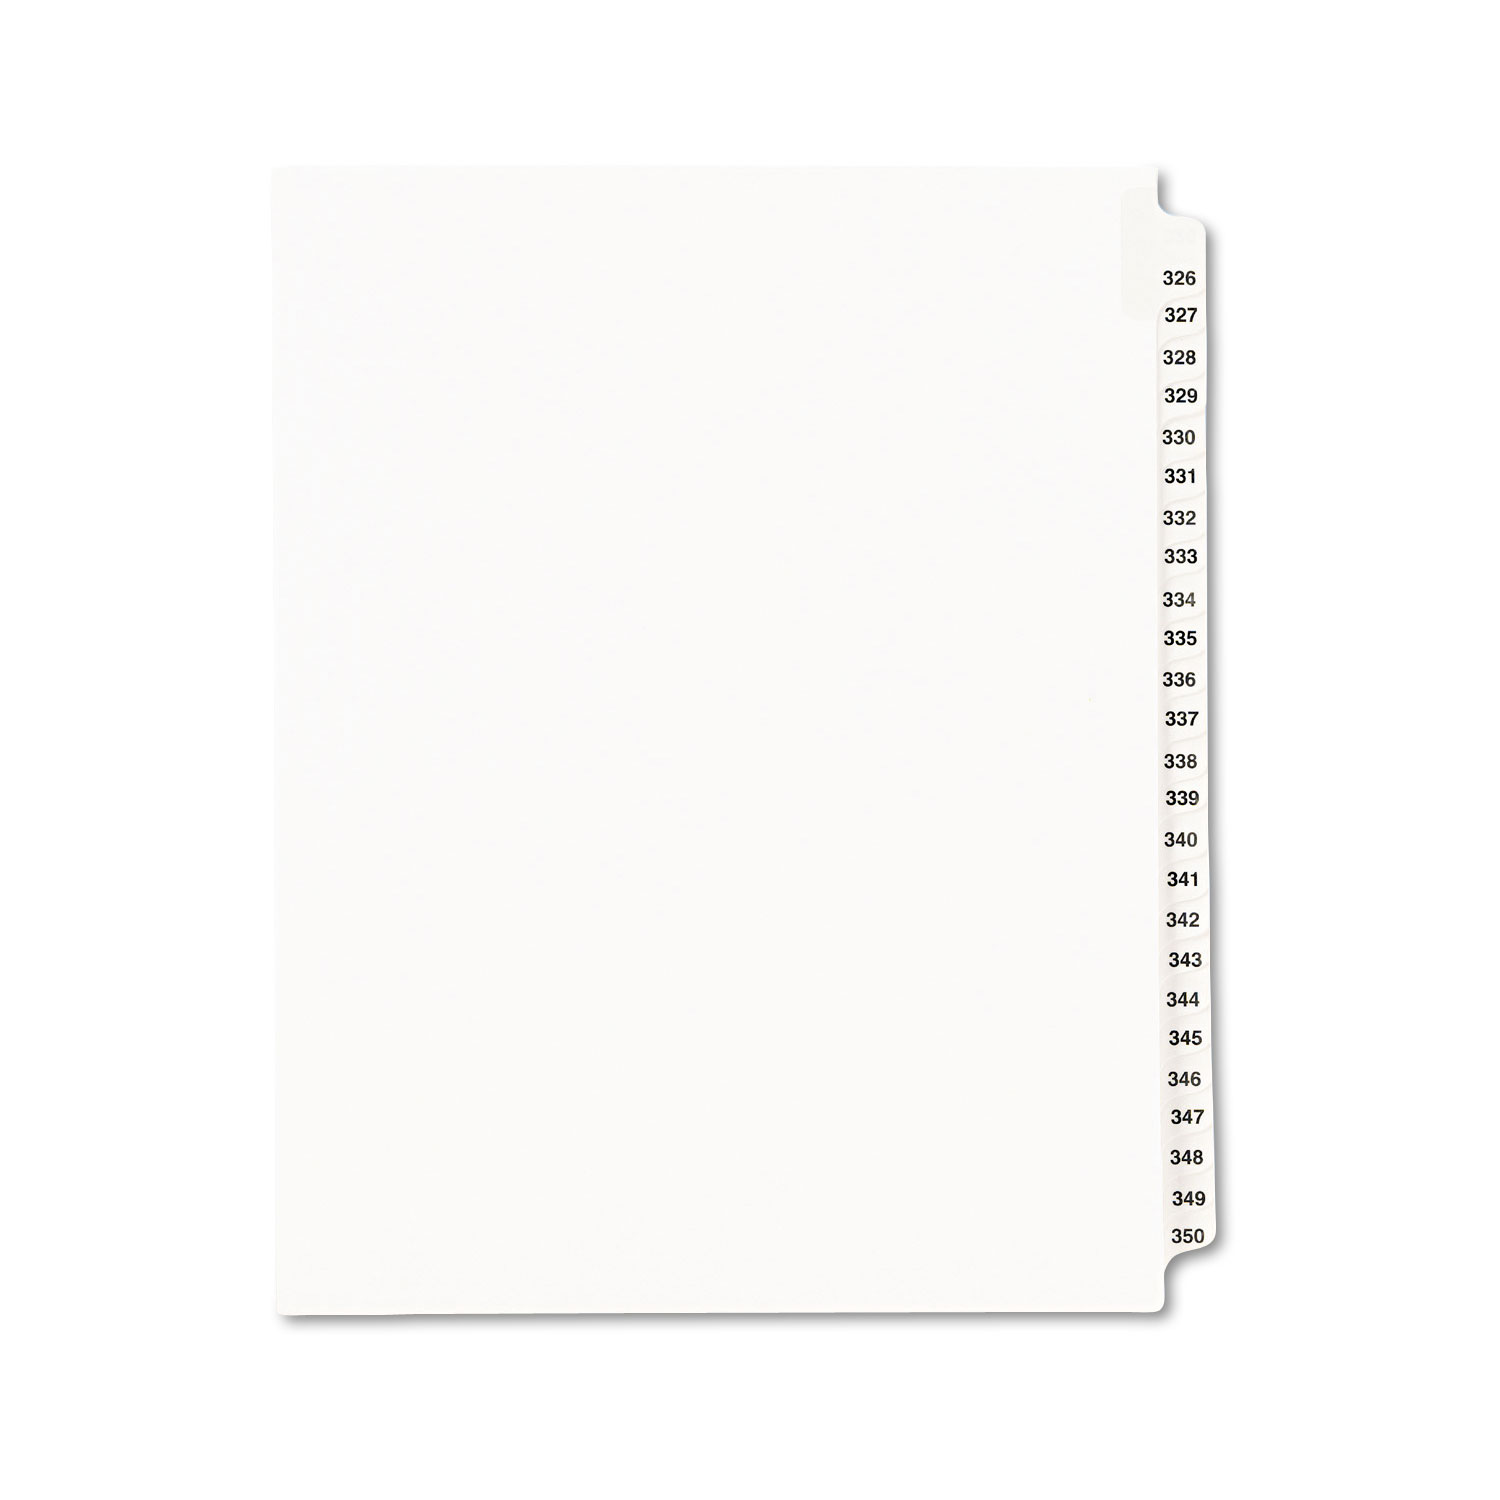  Avery 01343 Preprinted Legal Exhibit Side Tab Index Dividers, Avery Style, 25-Tab, 326 to 350, 11 x 8.5, White, 1 Set (AVE01343) 